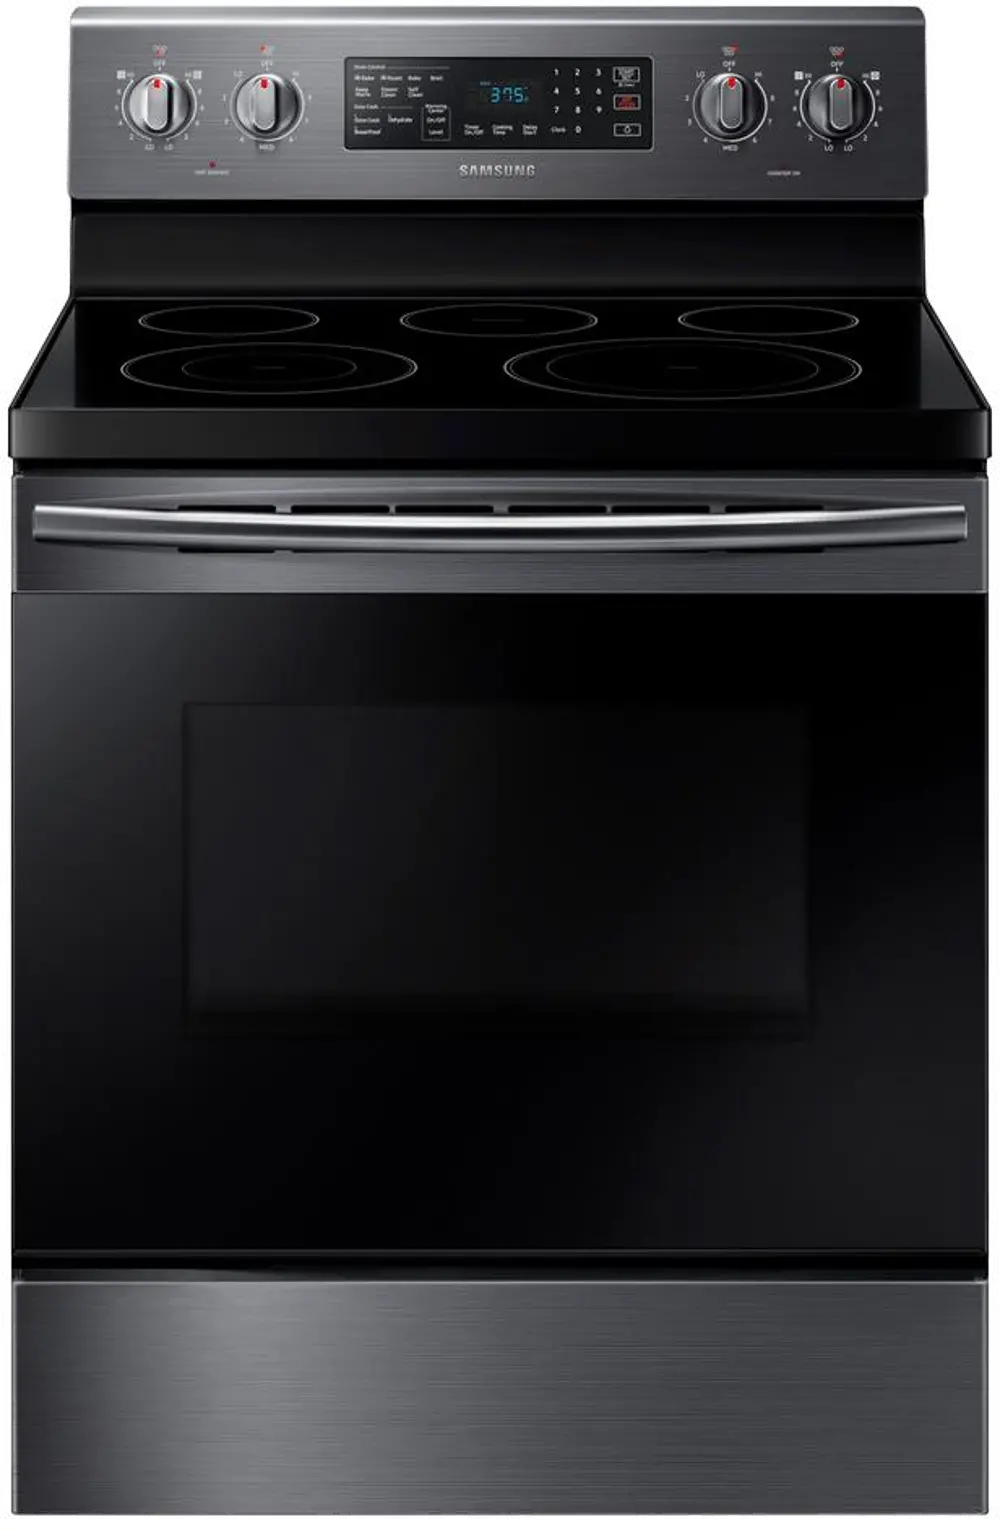 NE59M4320SG Samsung Electric Range with dual power elements - 5.9 cu. ft. Black Stainless Steel-1